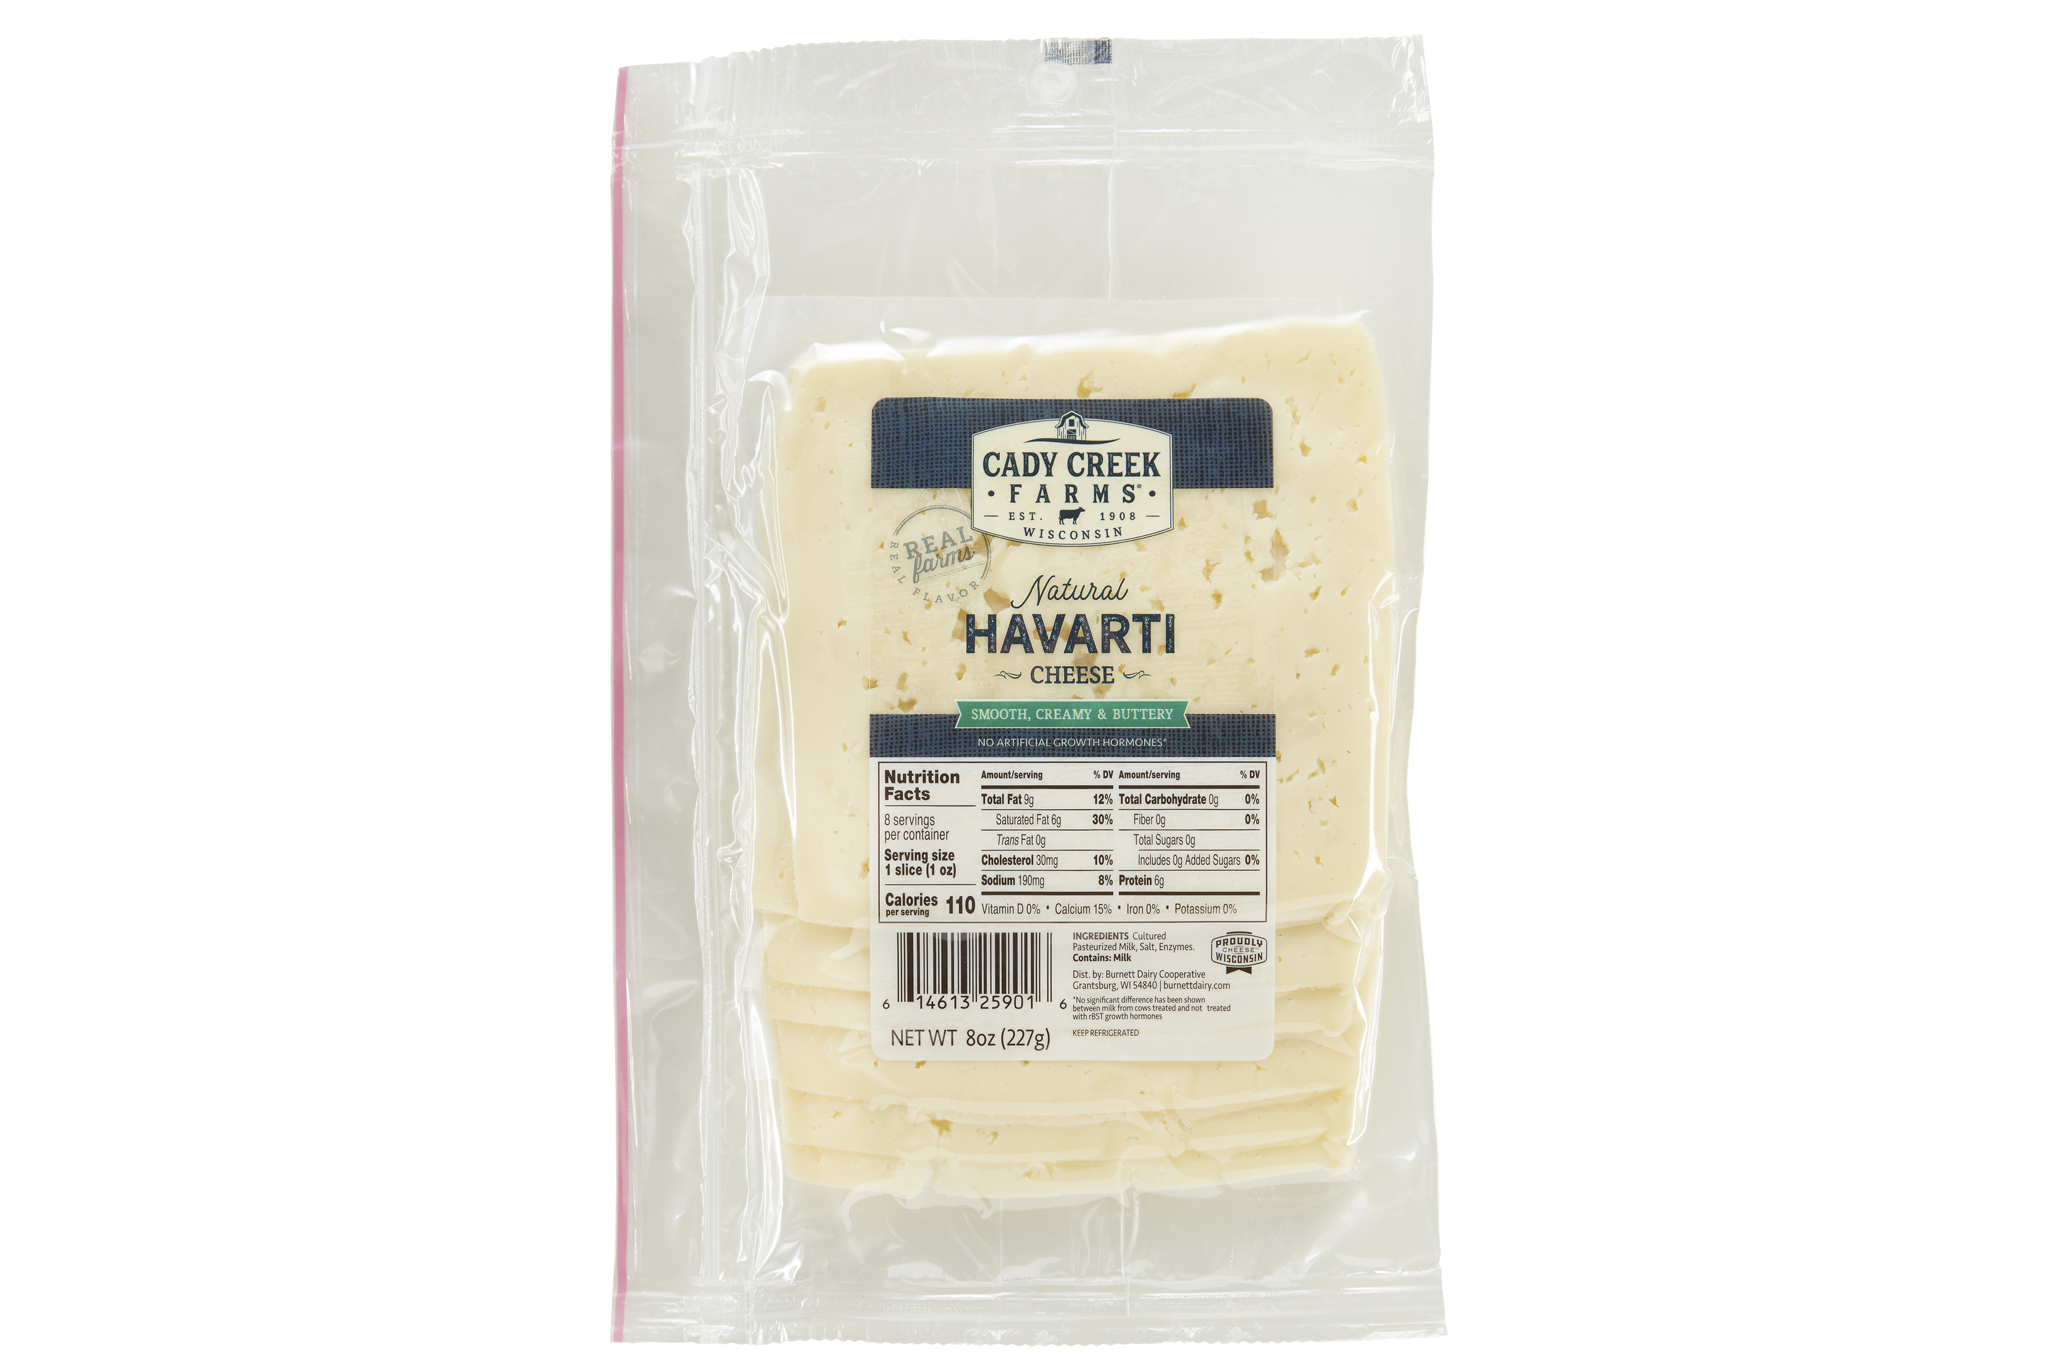 Cady Creek Farms 8 oz in package slices